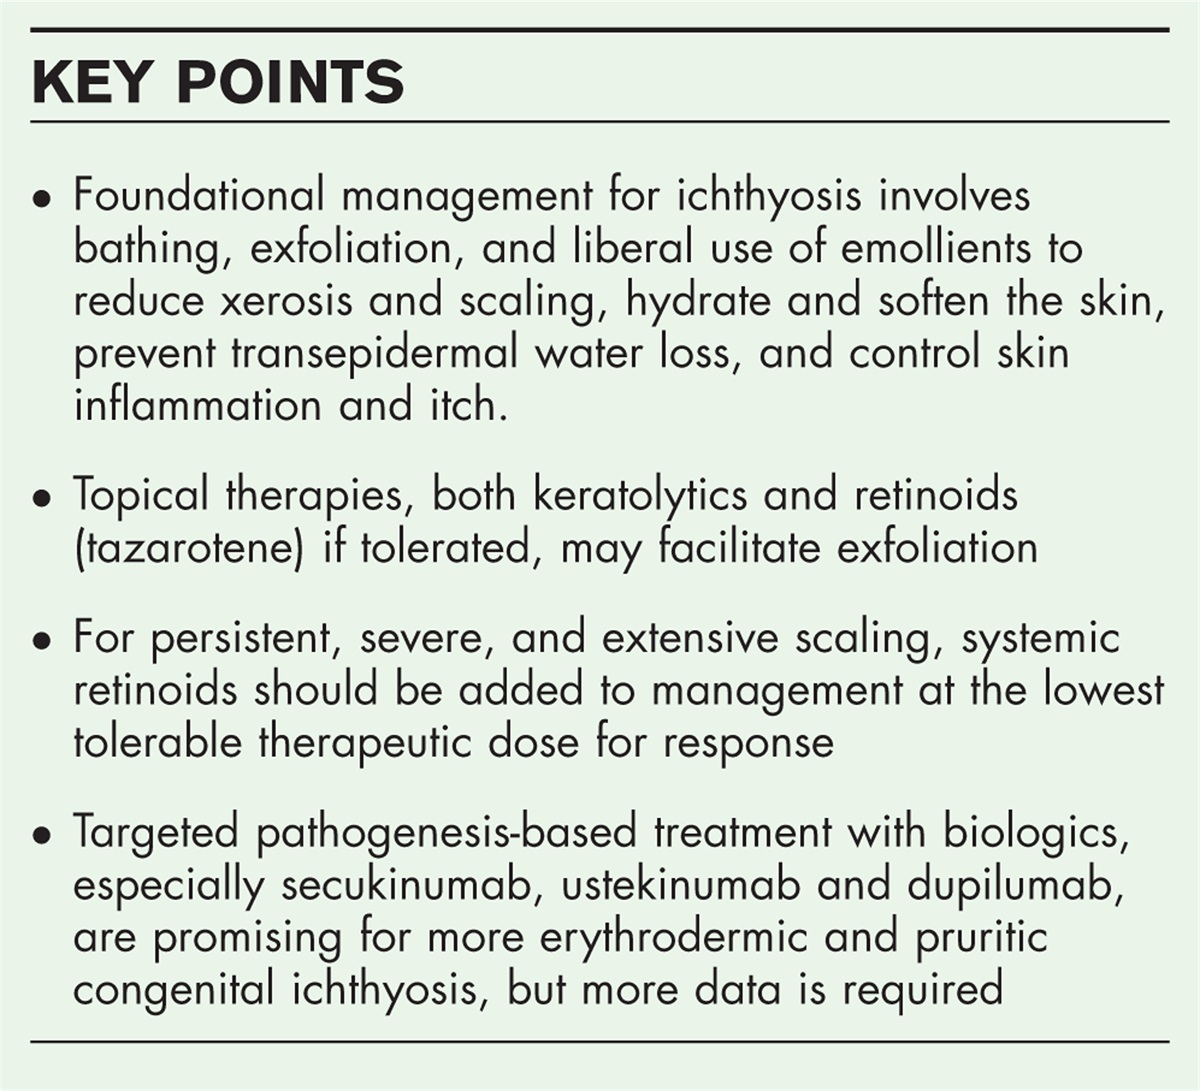 Ichthyosis: presentation and management